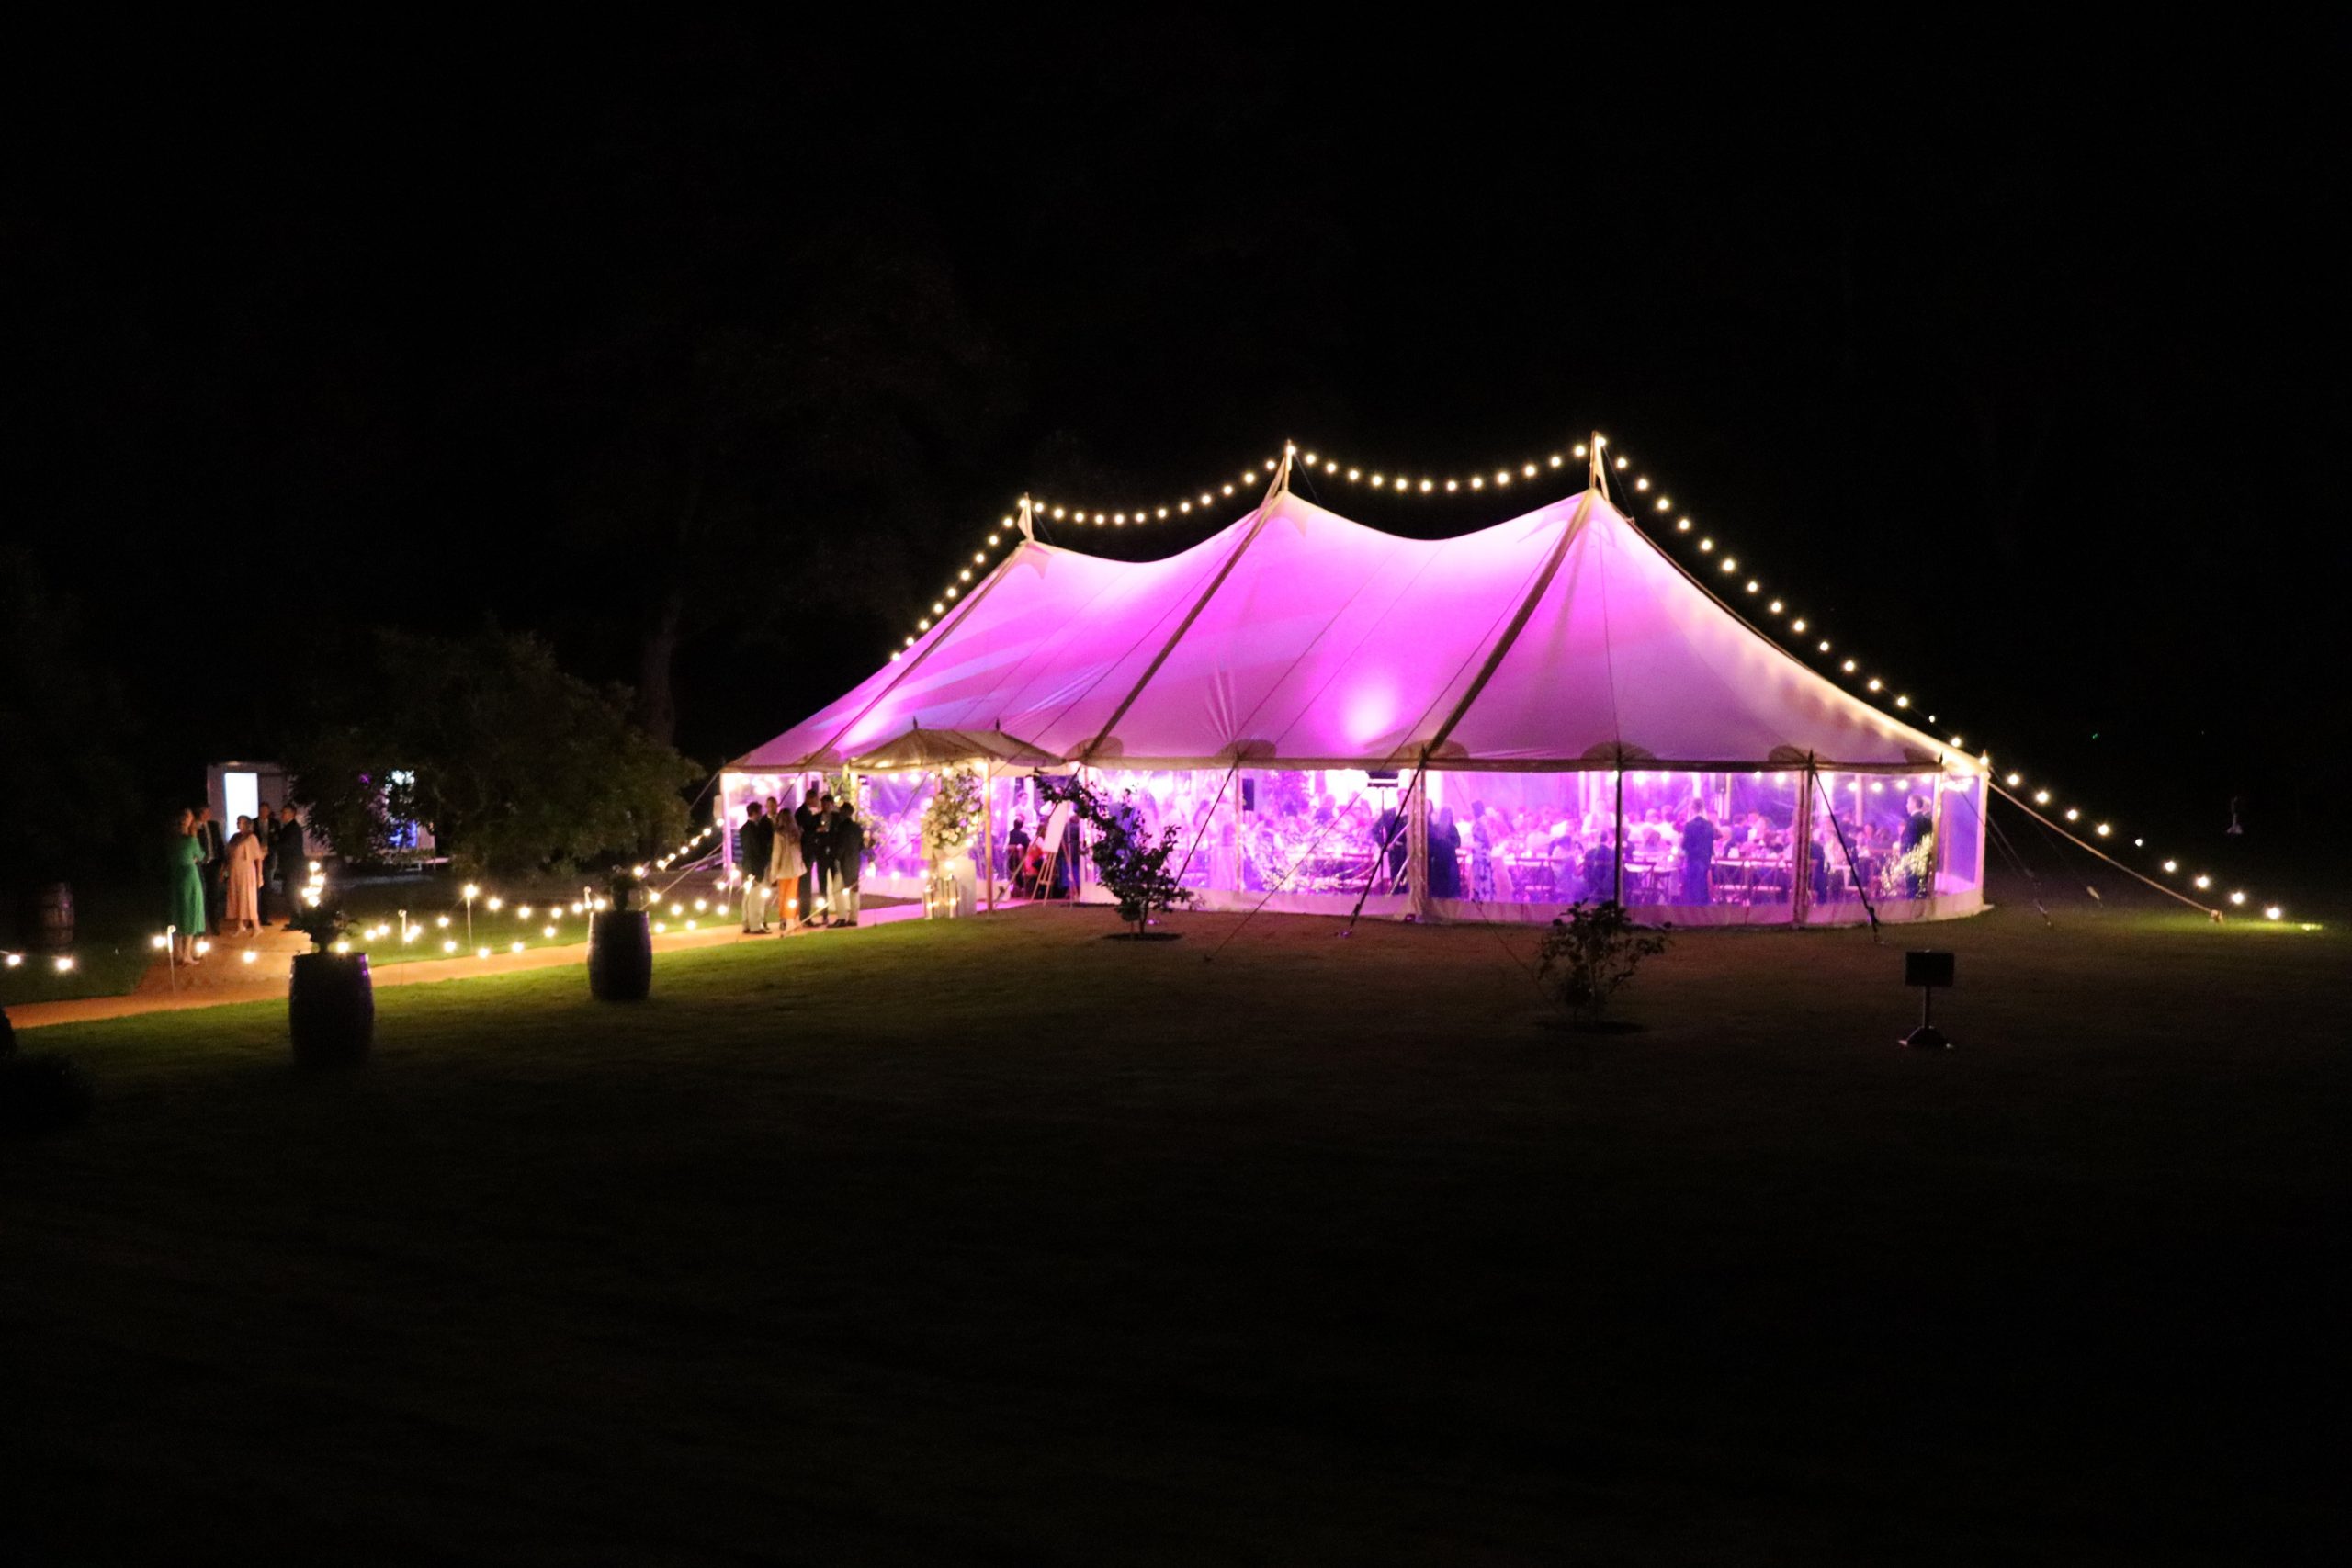 Traditional pole marquee illuminated by purple lighting